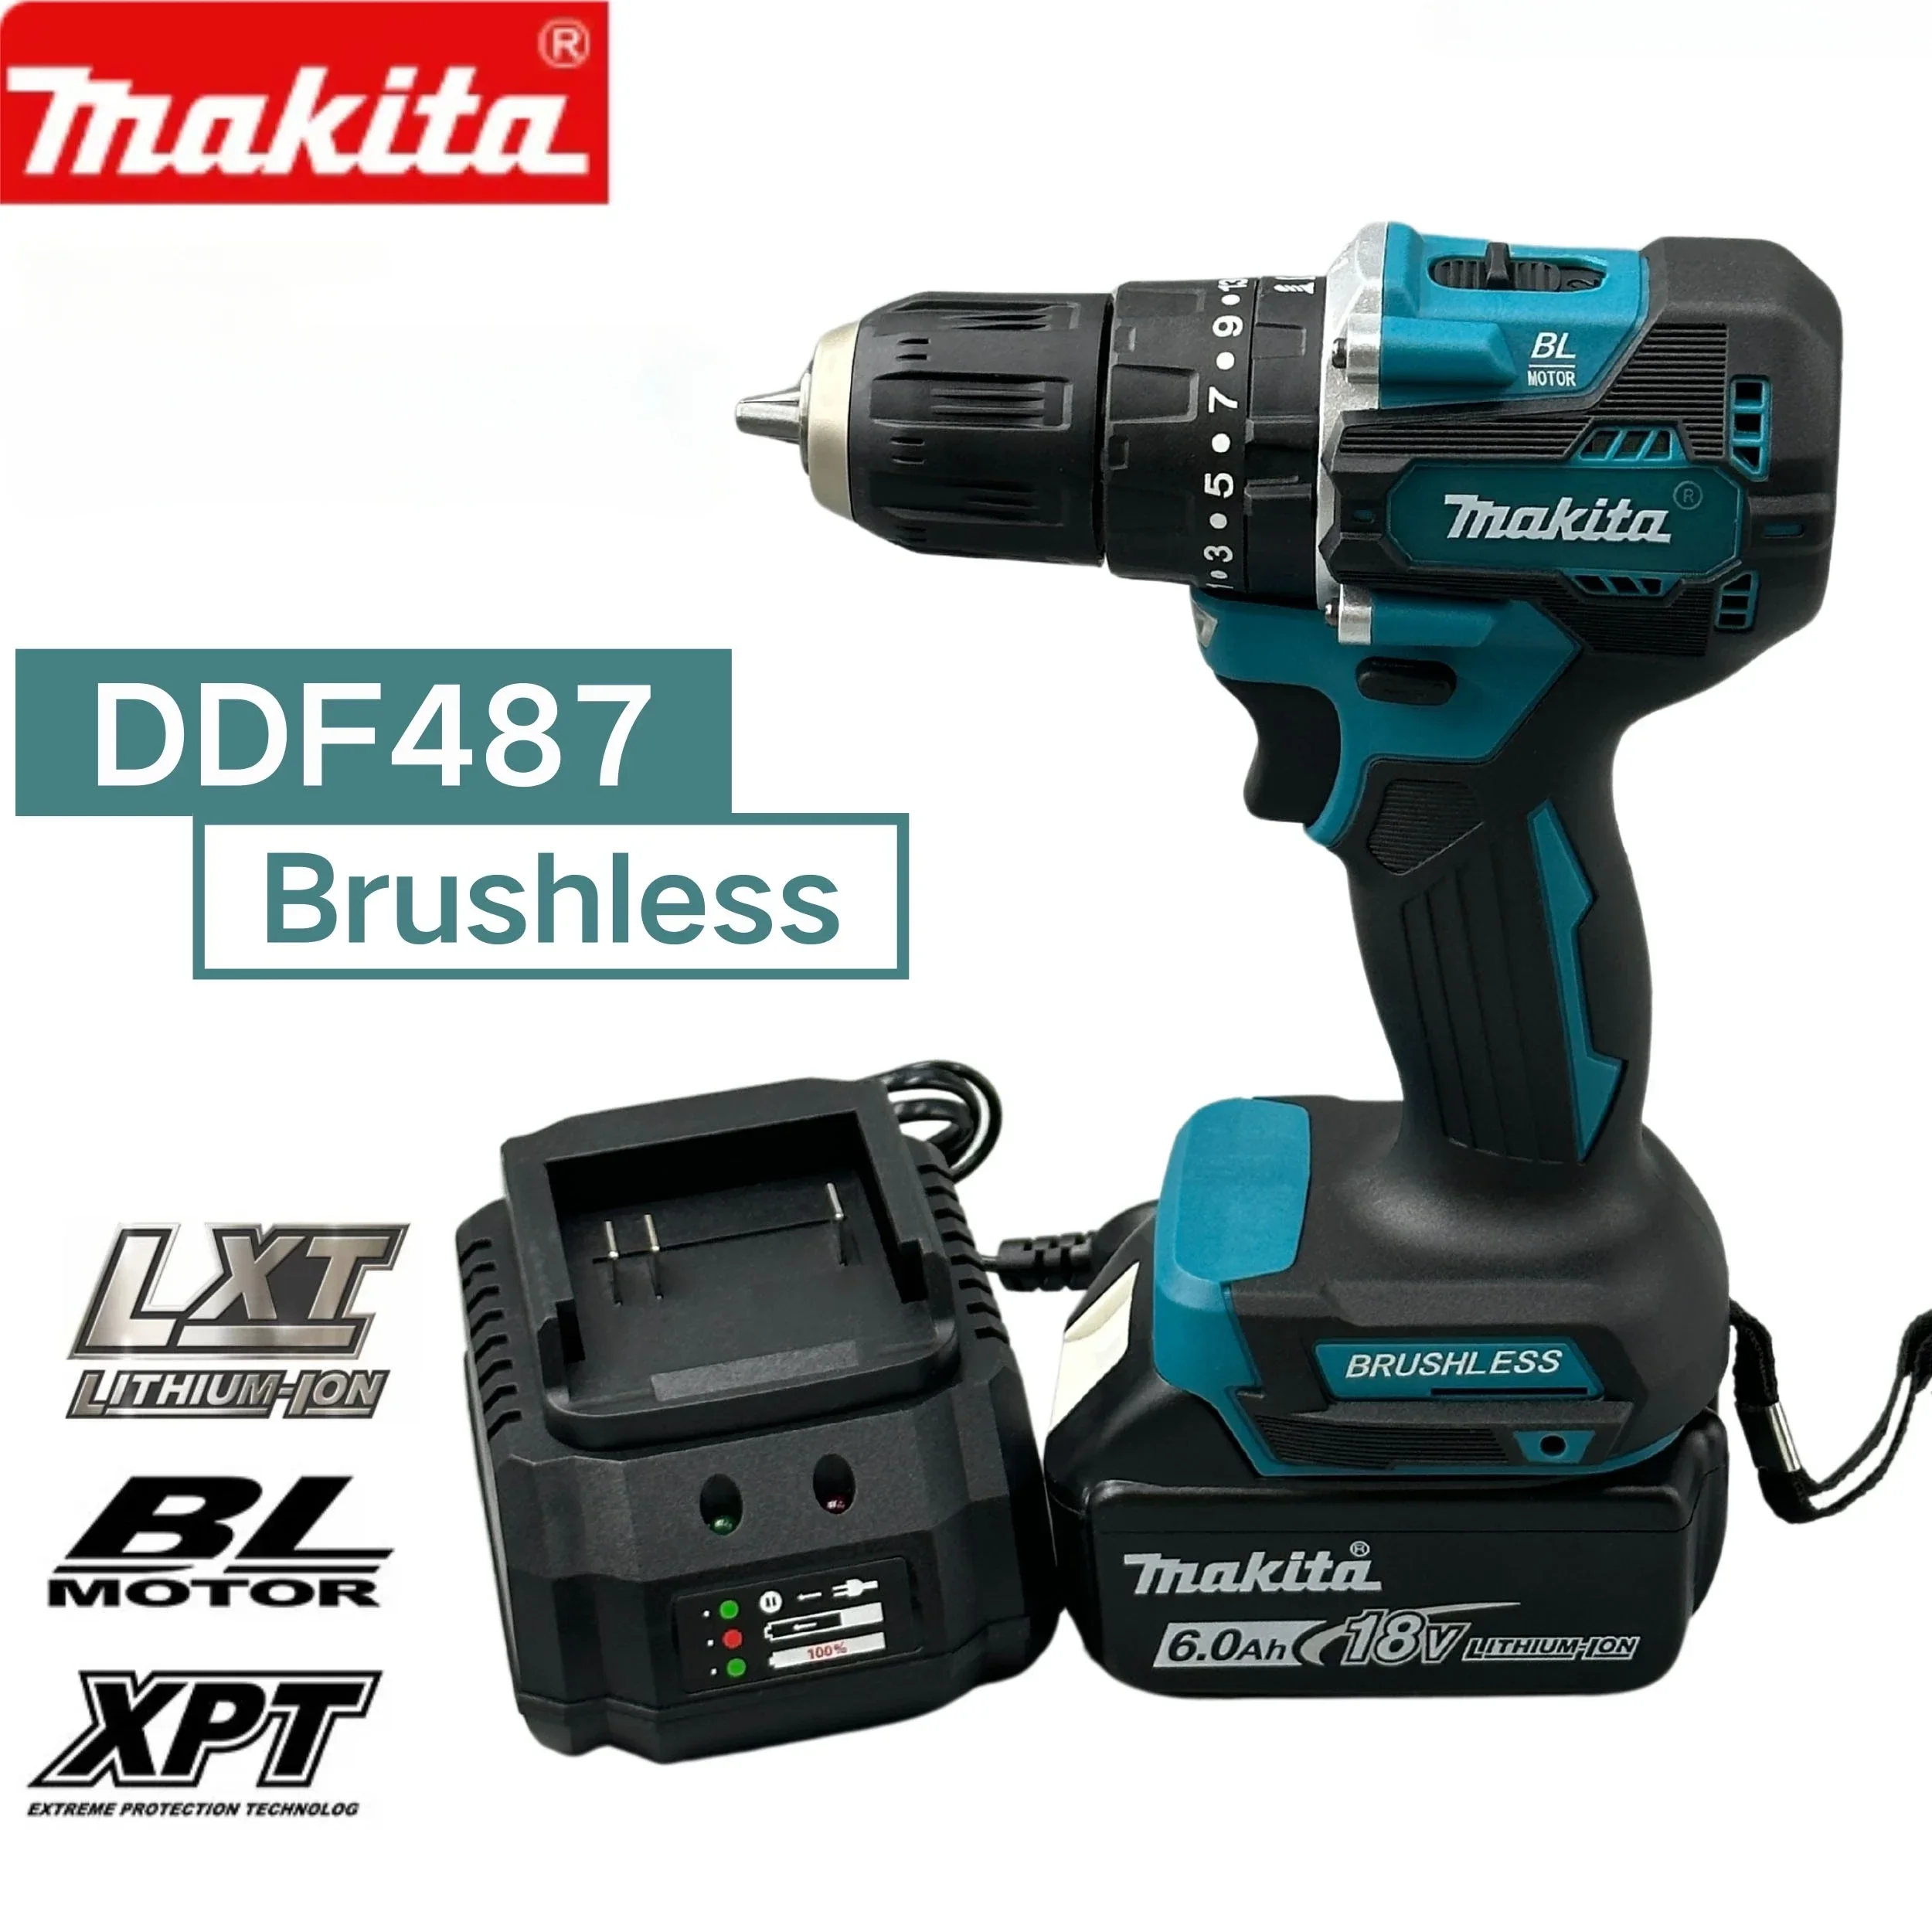 Makita DDF487 18V Electric Screwdriver brushless  Cordless Driver Drill LXT Battery drill Brushless Motor Compact Great Couple-animated-img